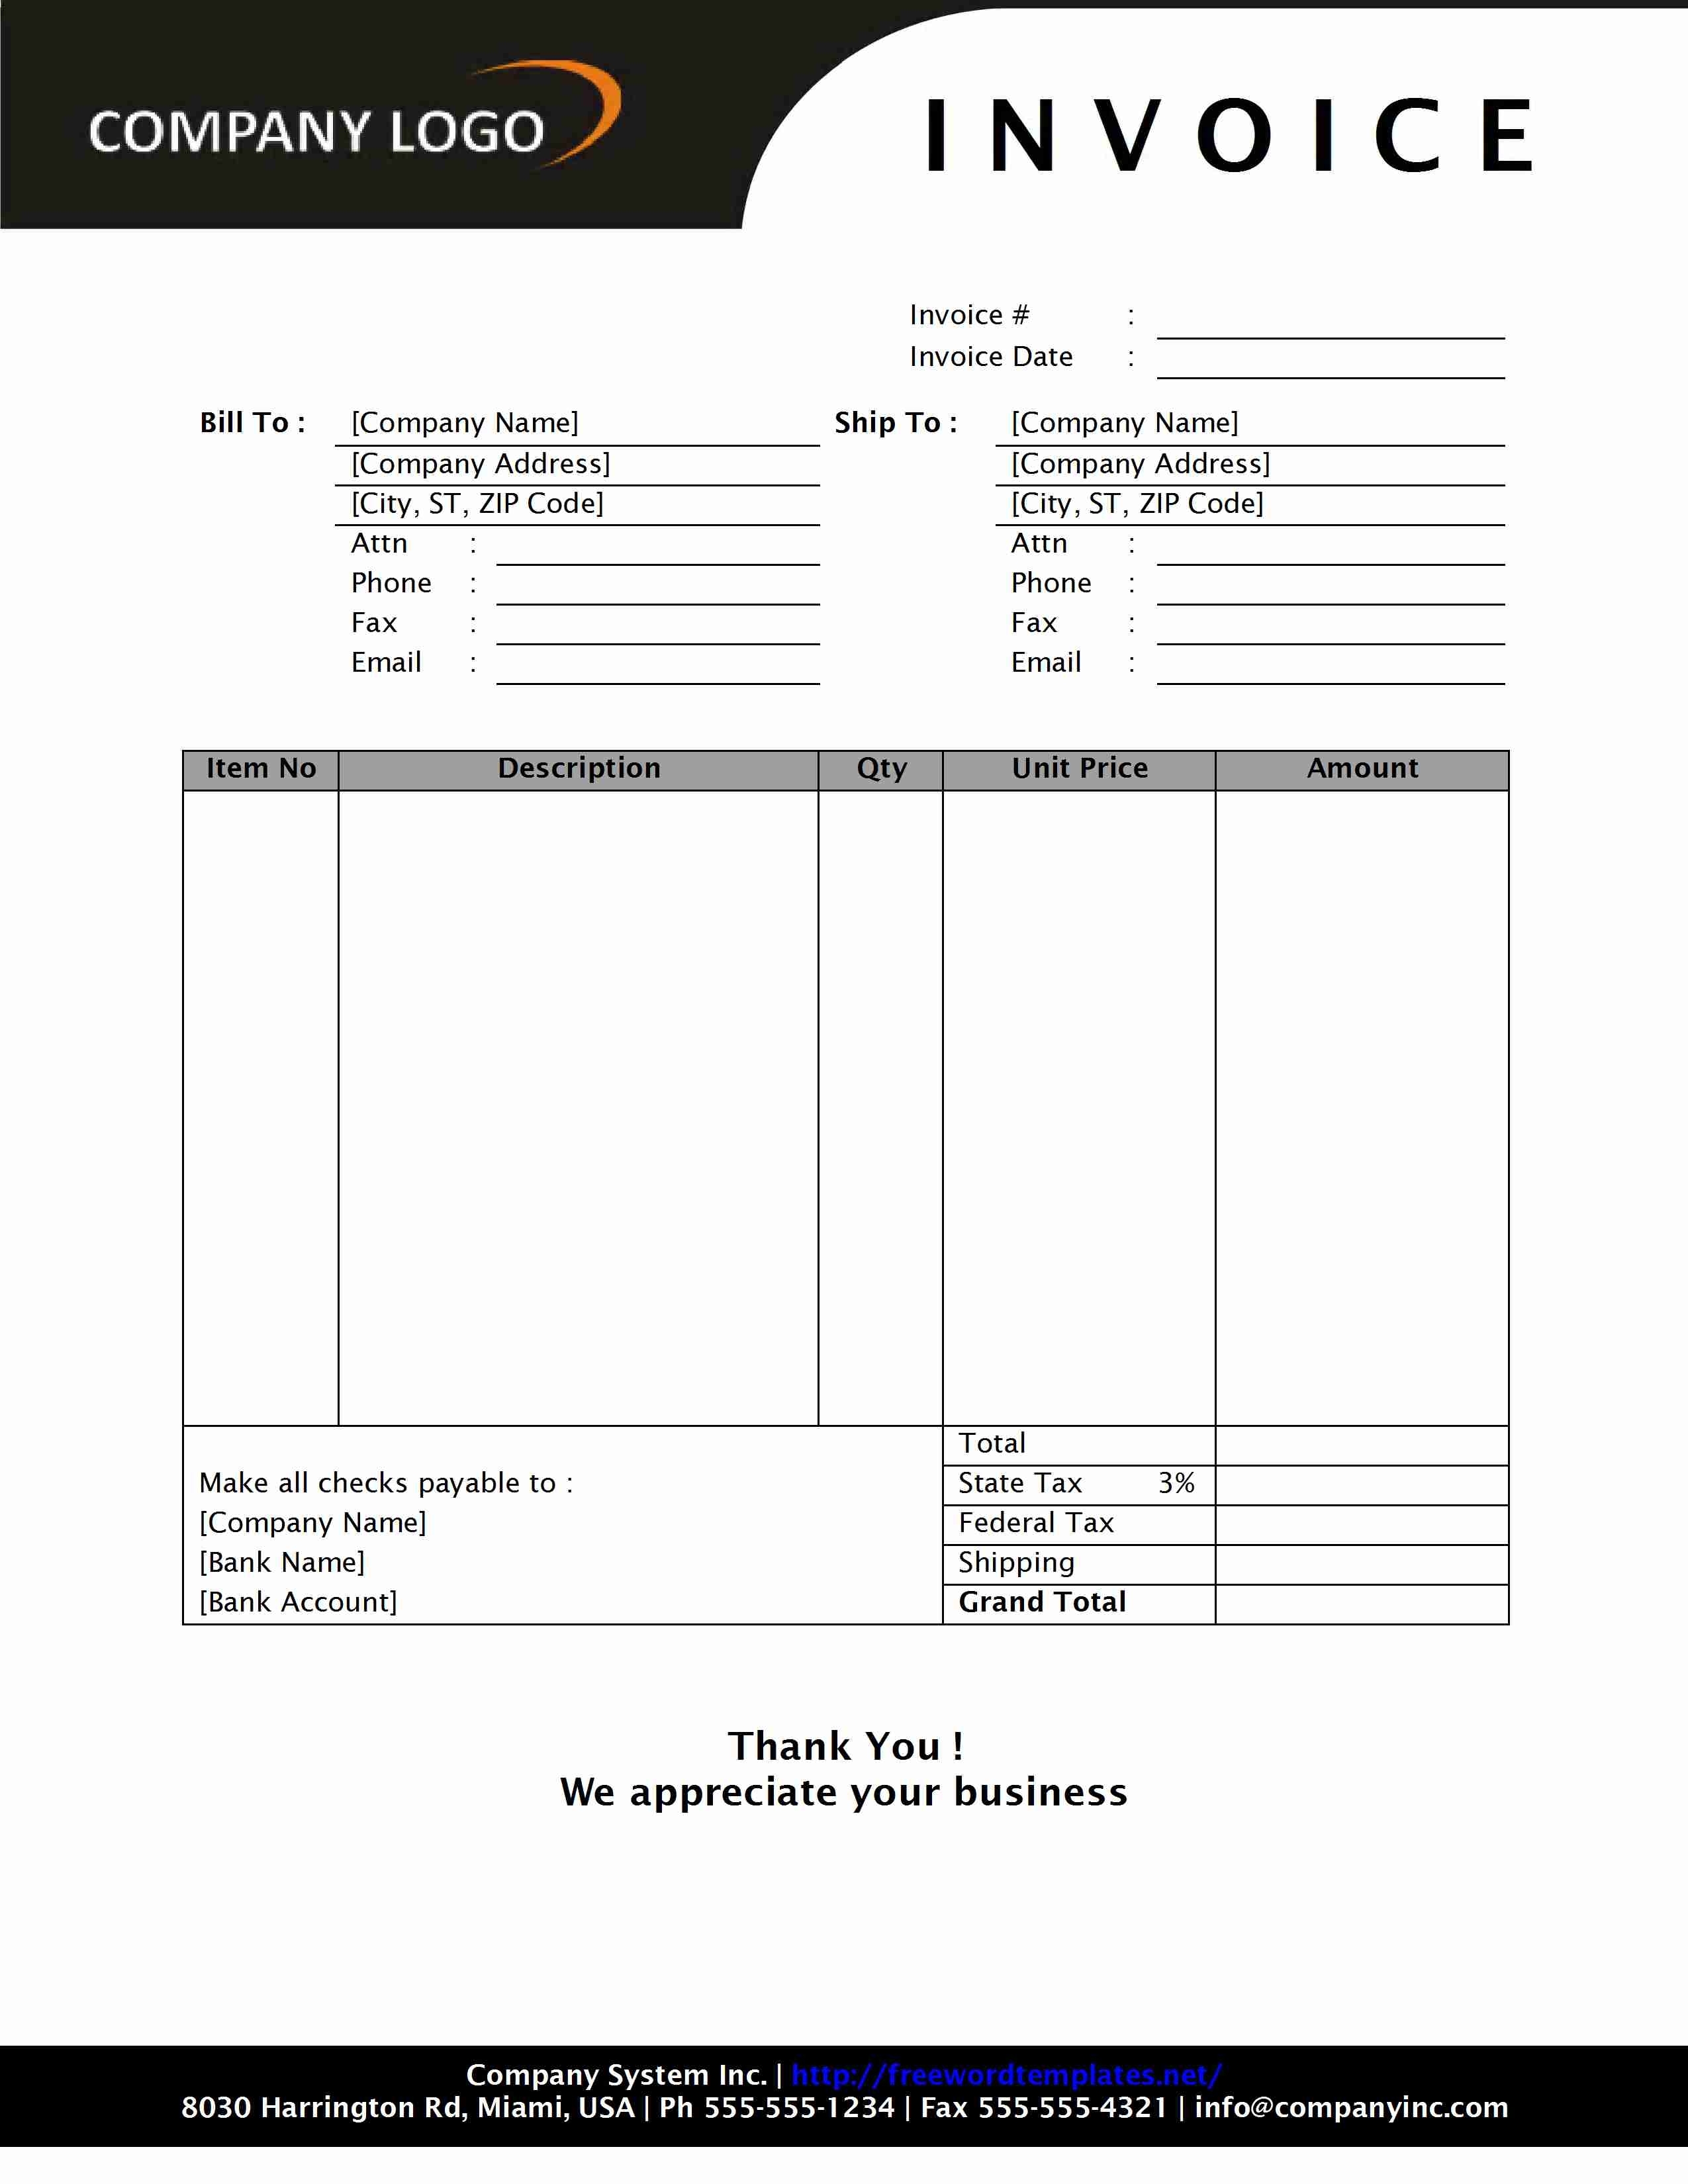 sale invoice format invoice template free 2016 sales invoice template